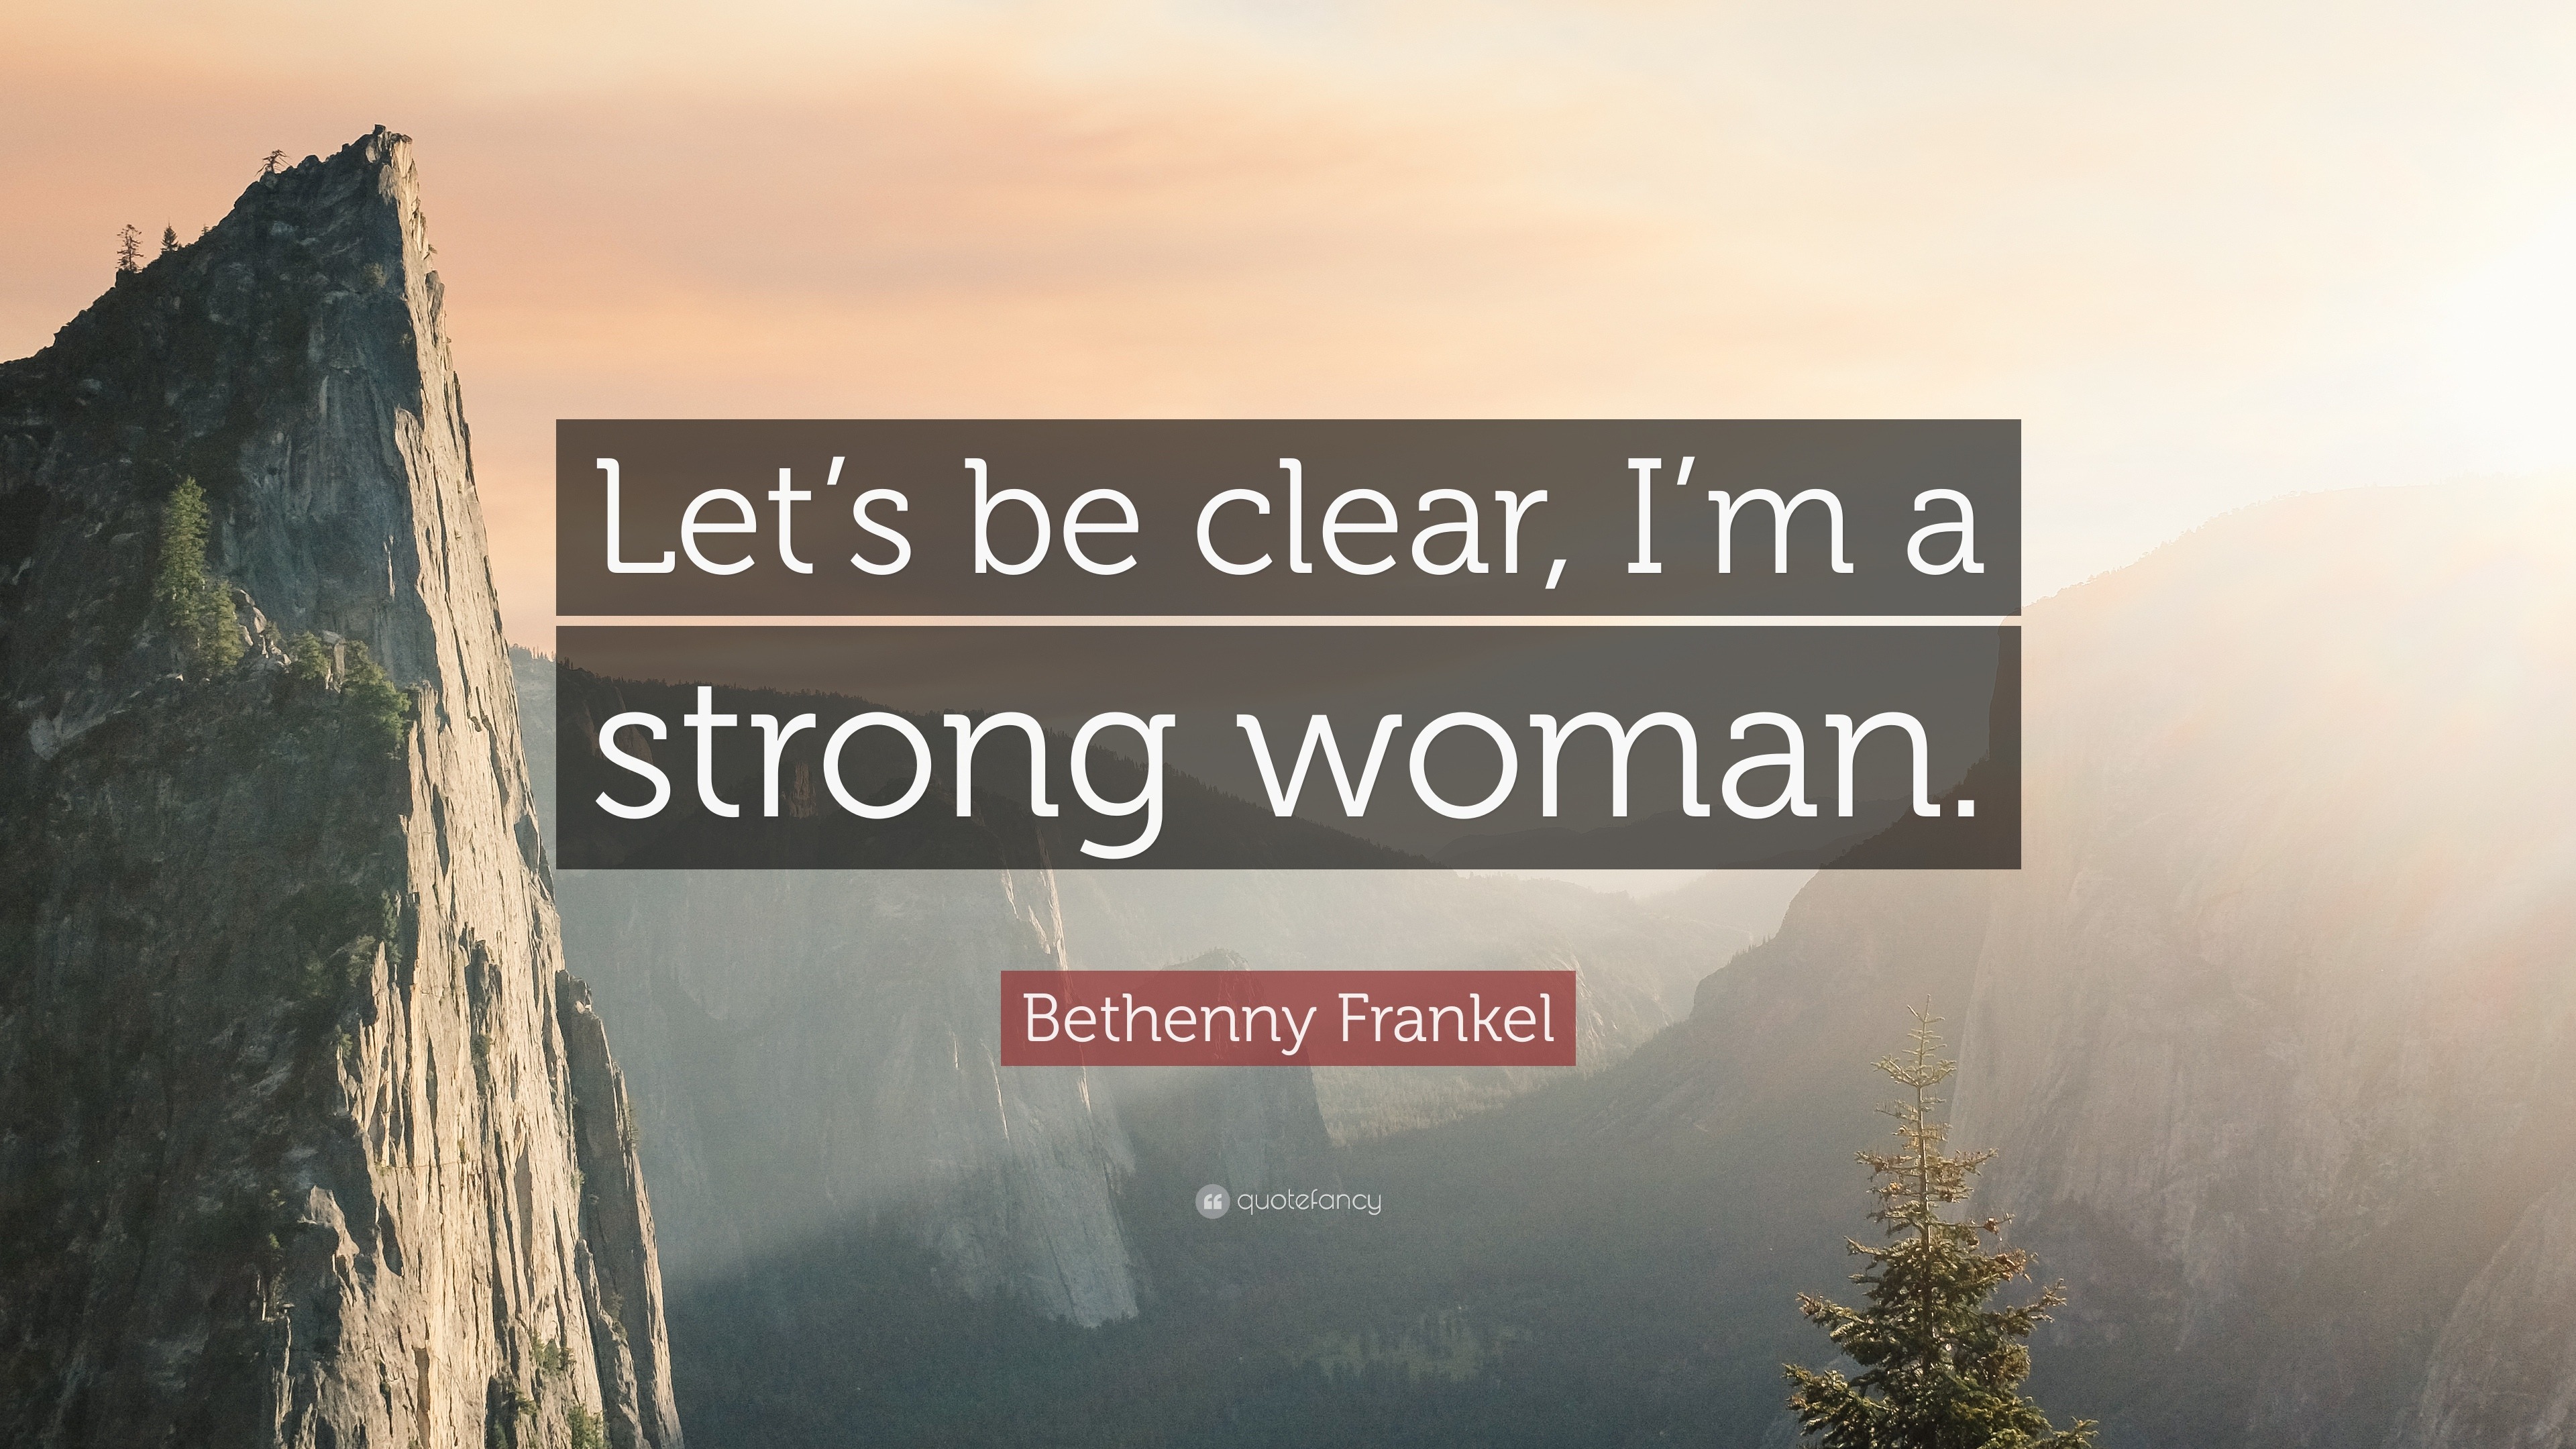 Bethenny Frankel Quote: “Let's be clear, I'm a strong woman.”